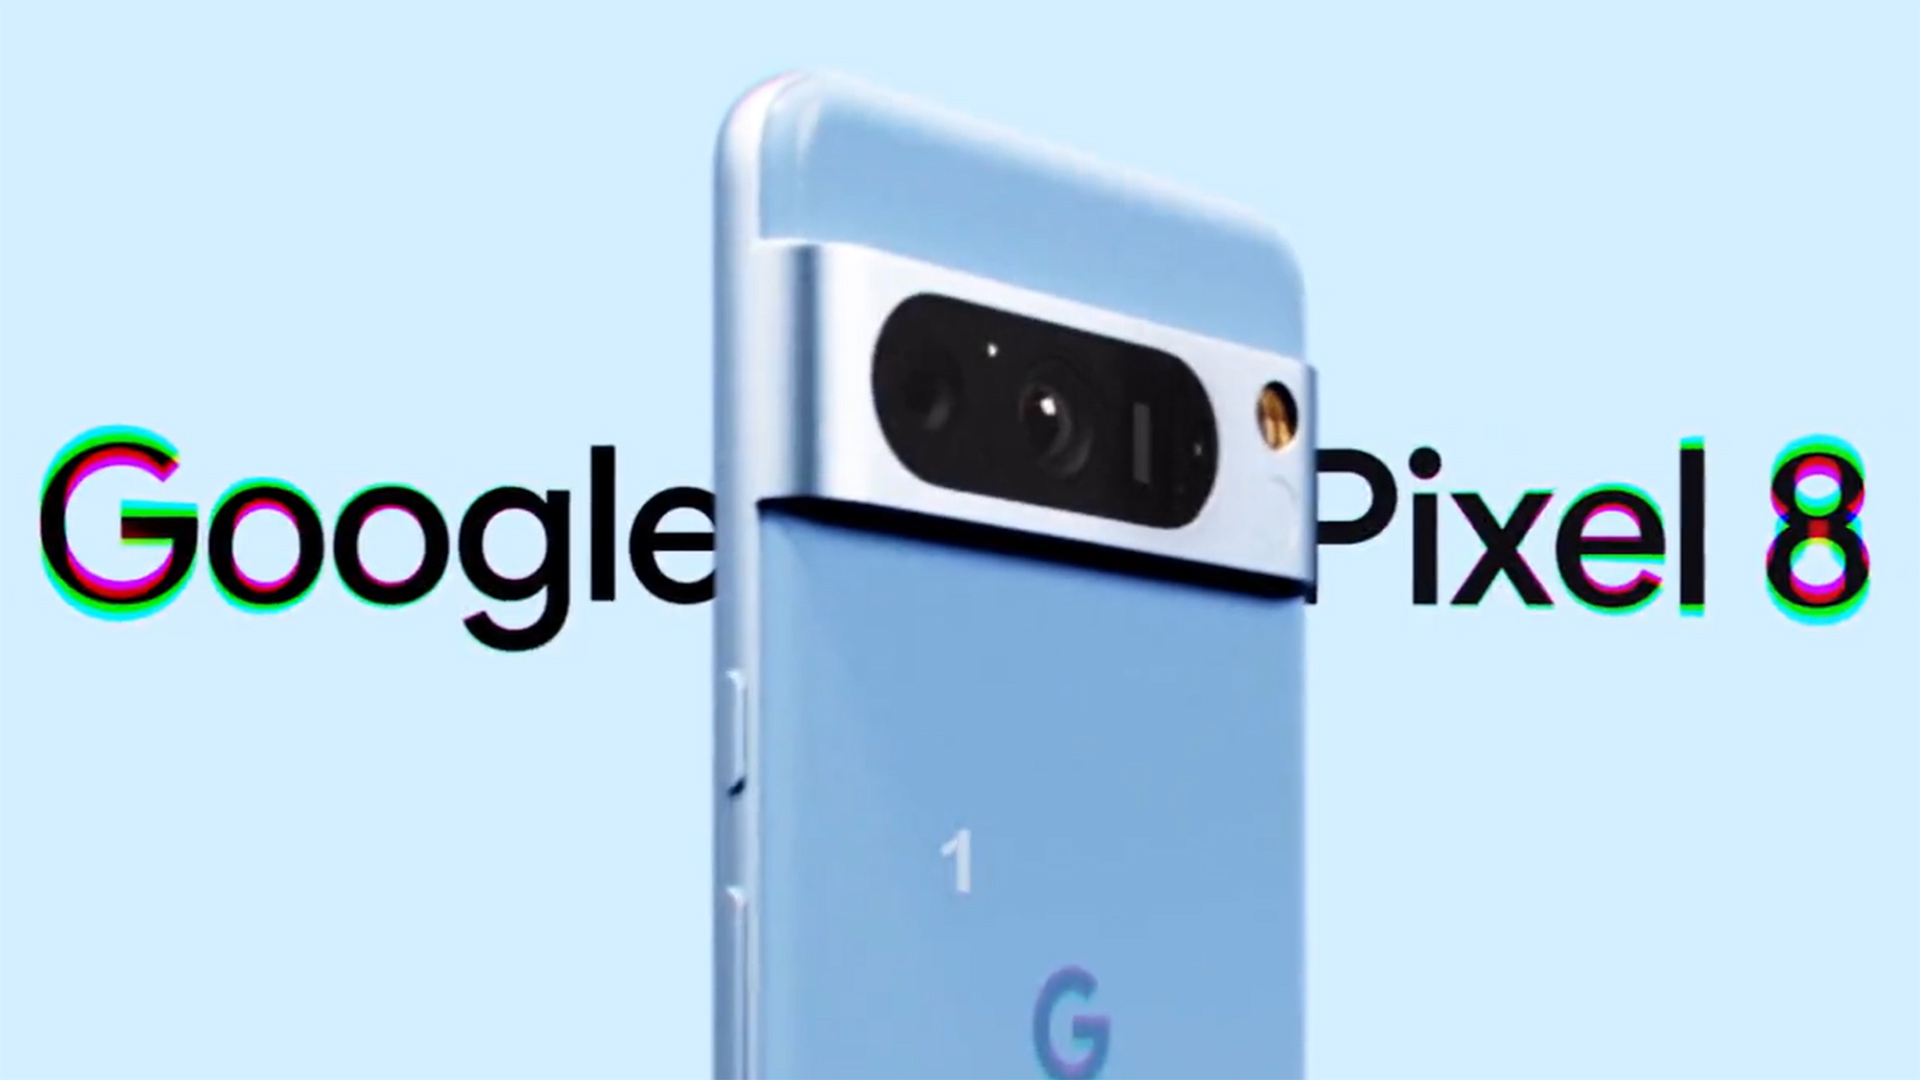 Pixel 8 Pro leaks again with ‘Audio Magic Eraser’ feature and blue color